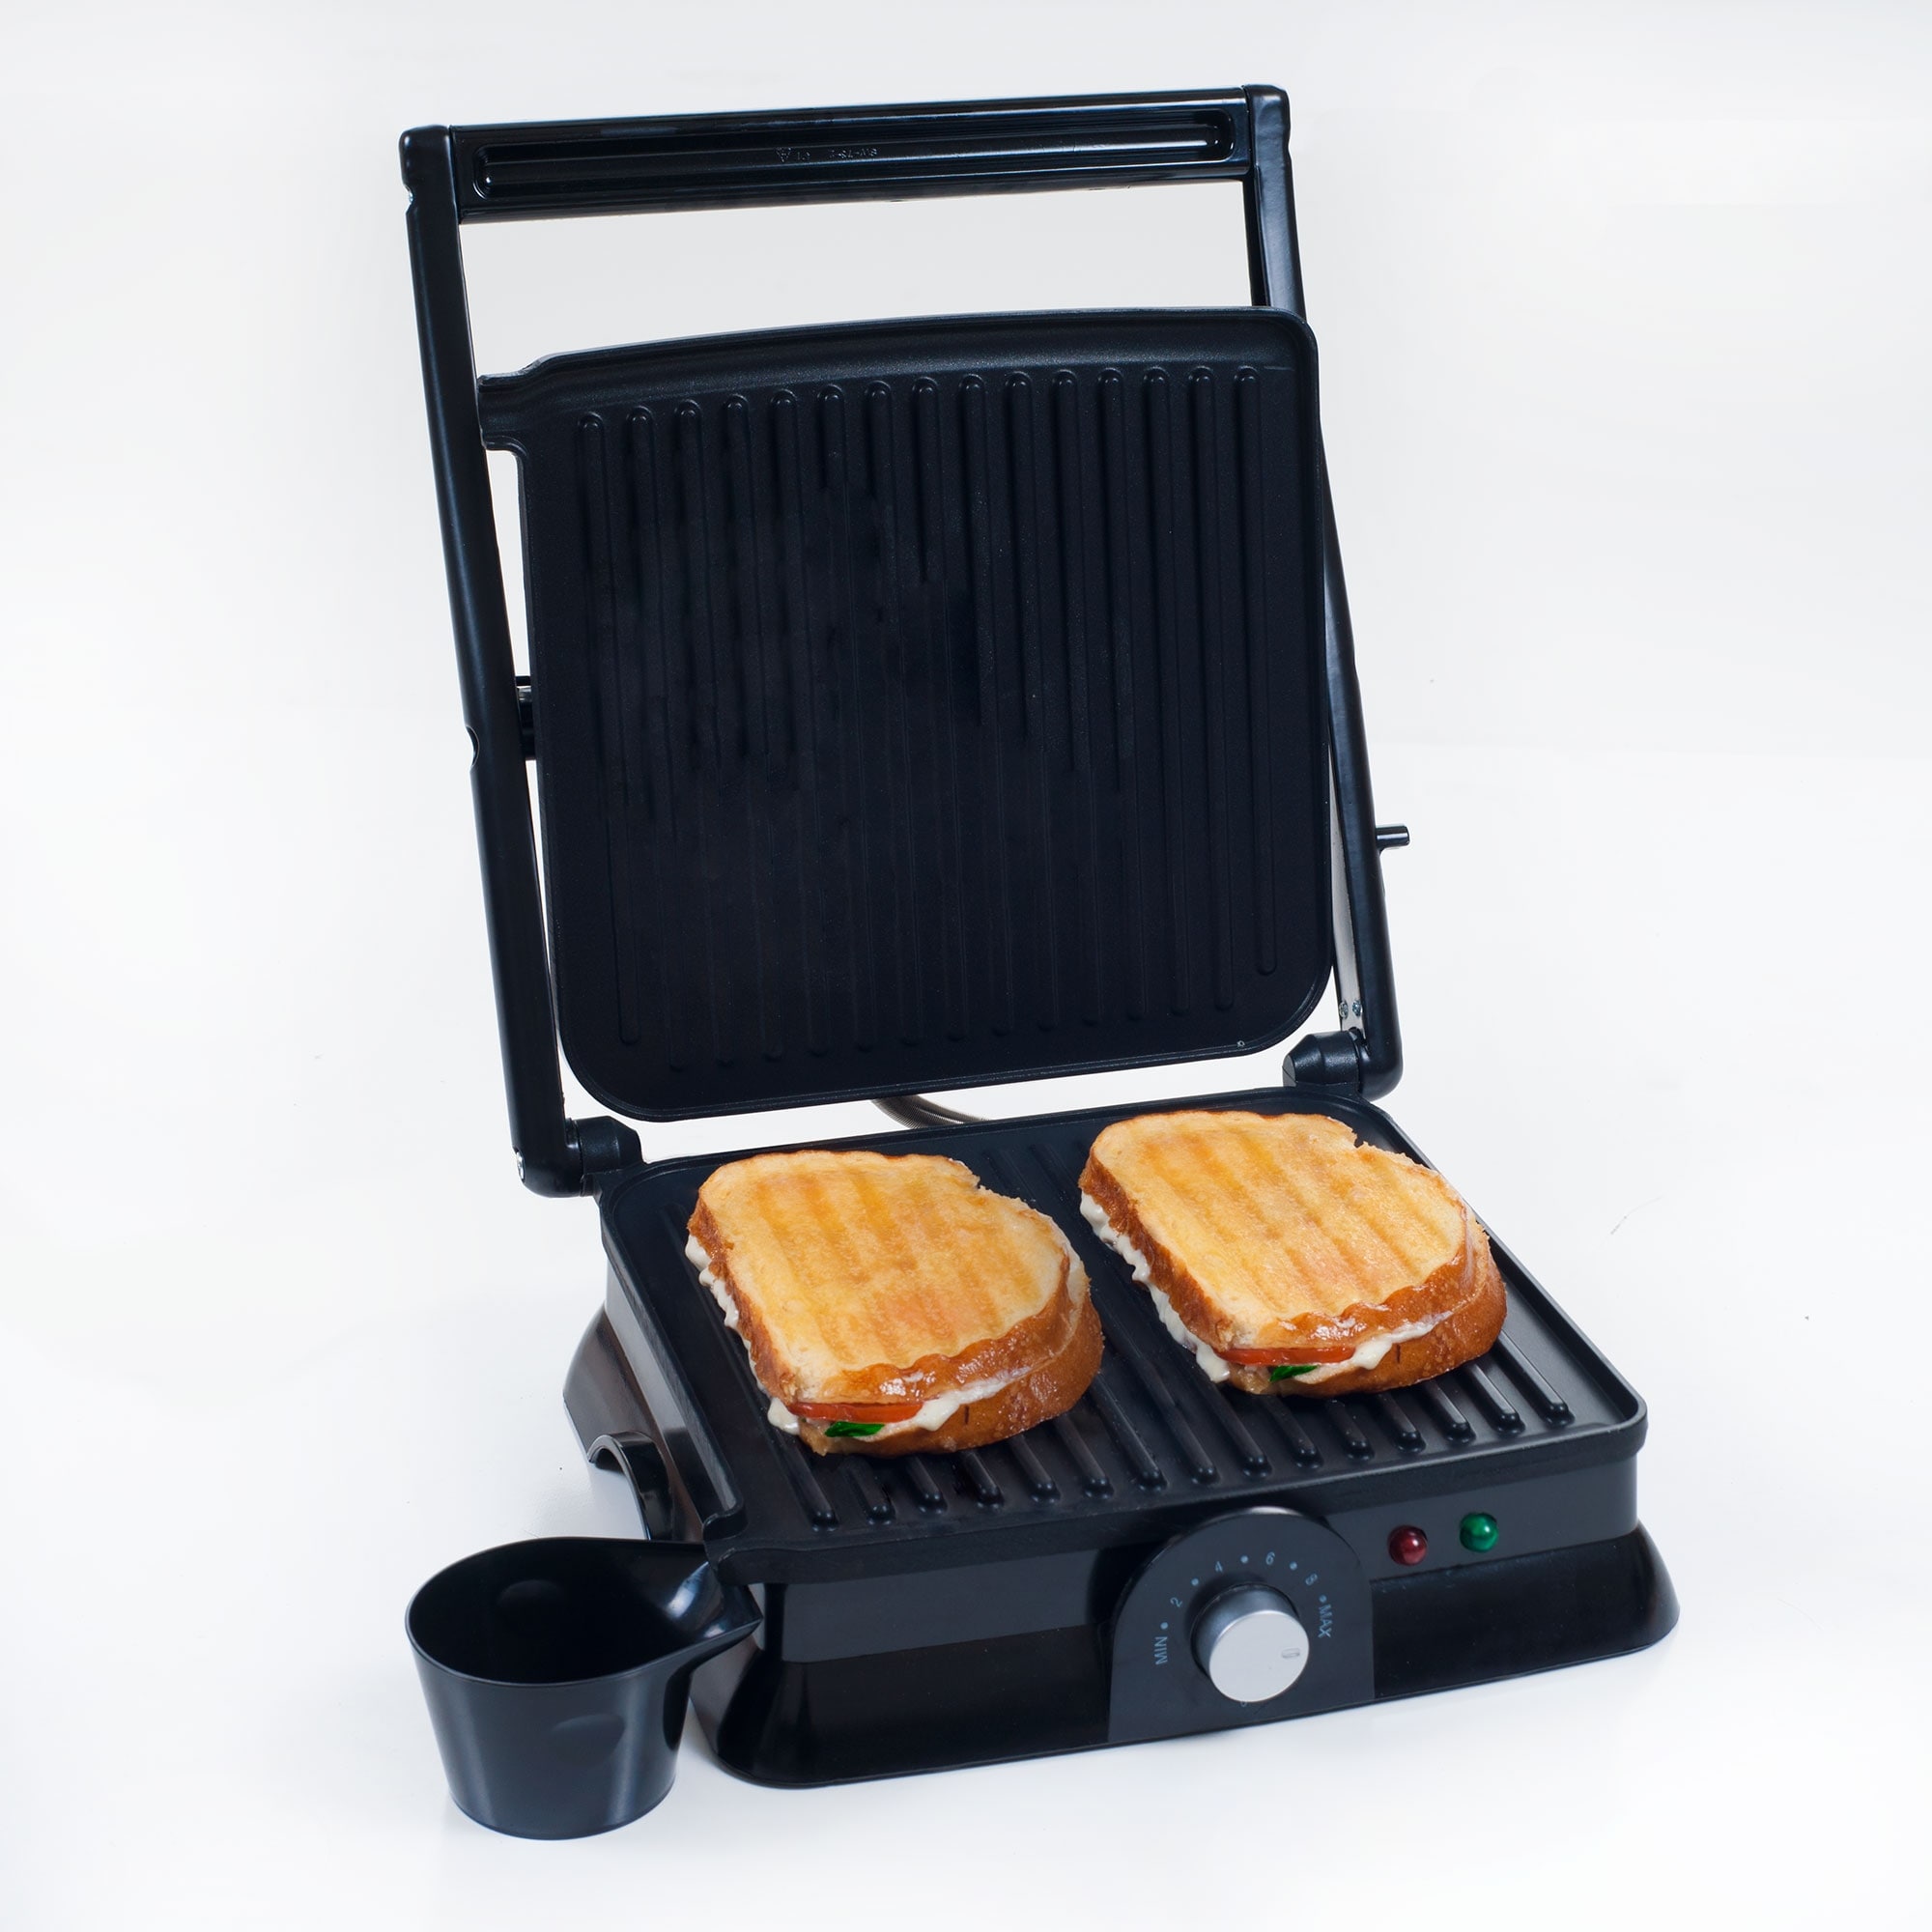 https://ak1.ostkcdn.com/images/products/is/images/direct/f684213739b5f9d6855ea752cdef9f011fc27b1a/Panini-Press---1400-Watt-Electric-Indoor-Grill-and-Gourmet-Sandwich-Maker-with-Nonstick-Plates-by-Chef-Buddy.jpg